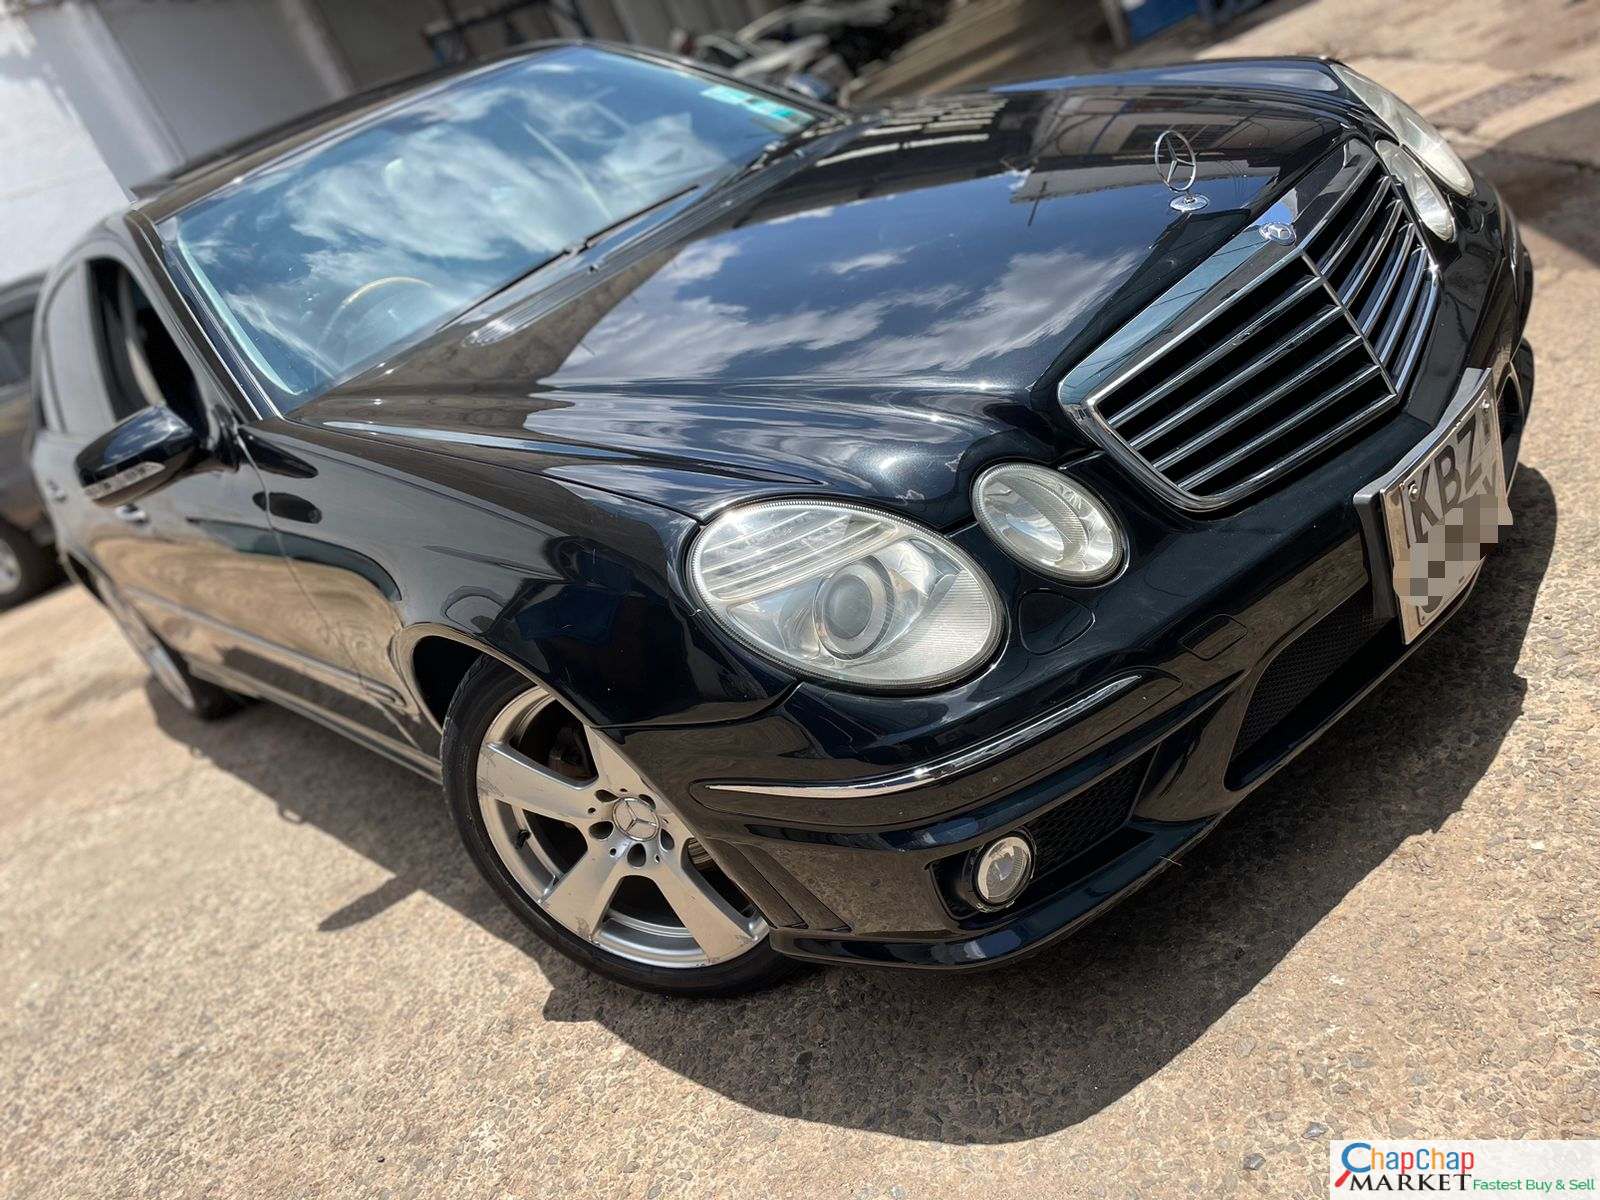 Mercedes Benz E200 SUNROOF Cheapest You Pay 30% DEPOSIT Trade in OK EXCLUSIVE